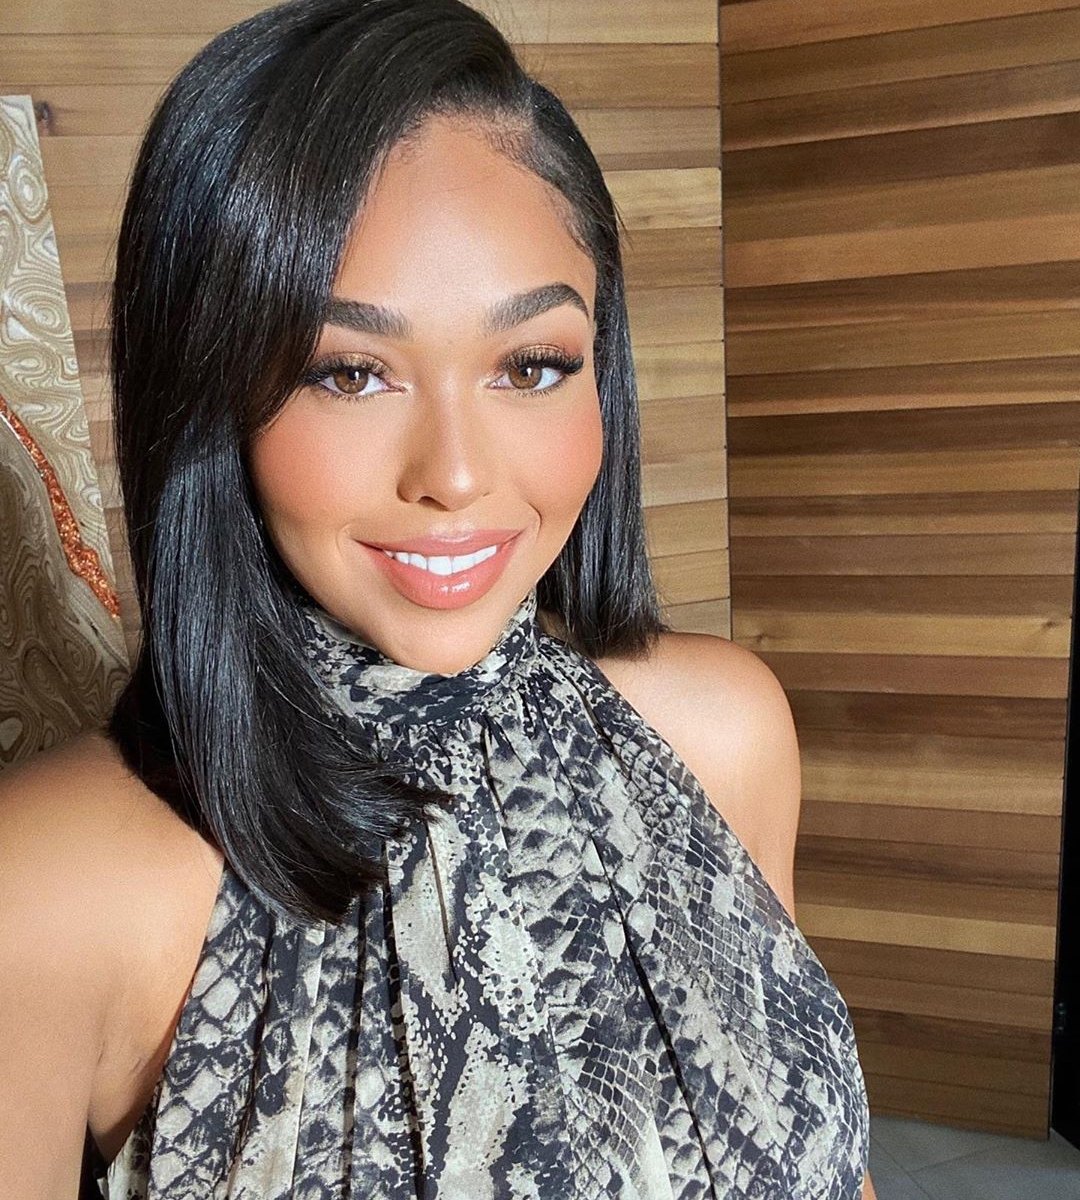 Jordyn woods is slimming down and looking like a brand new person